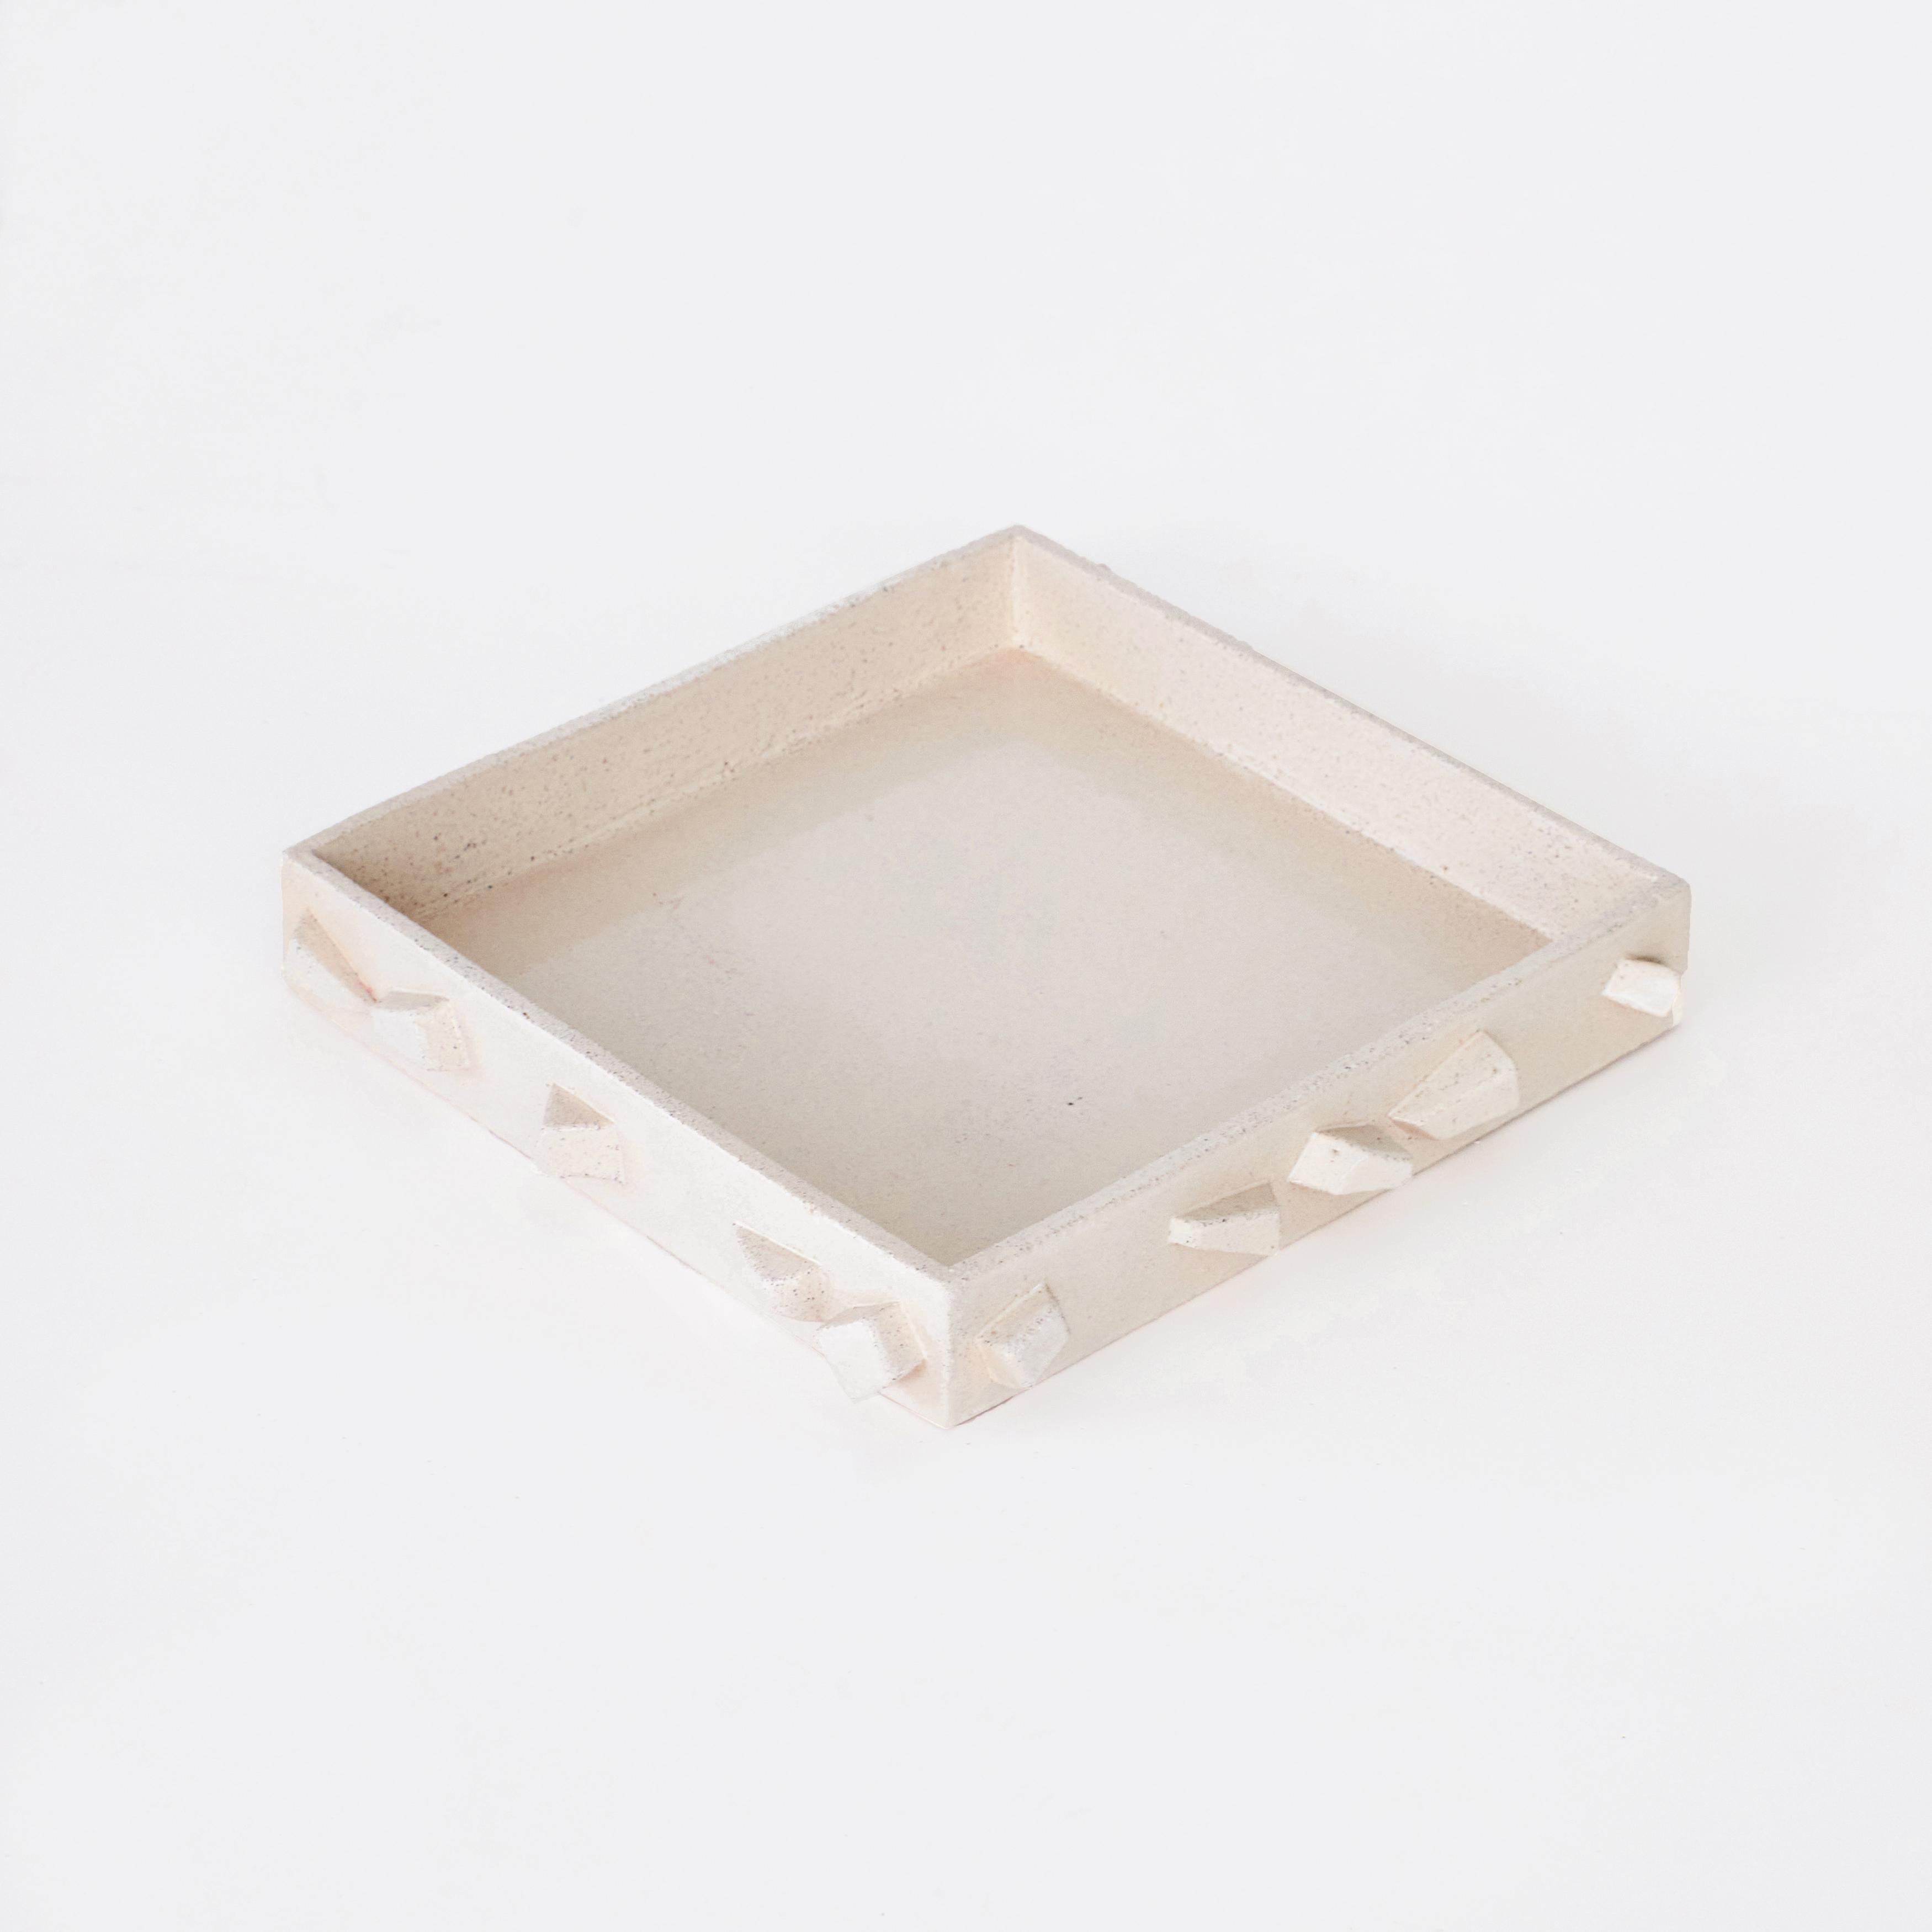 'For Rachel' tray in Cream

Hand-sculpted ceramic tray with hand made rectangle shaped elements. This large sized tray is finished with a bespoke cream glaze that reveals the natural grain of the clay beneath and is hallmarked with Project 213A